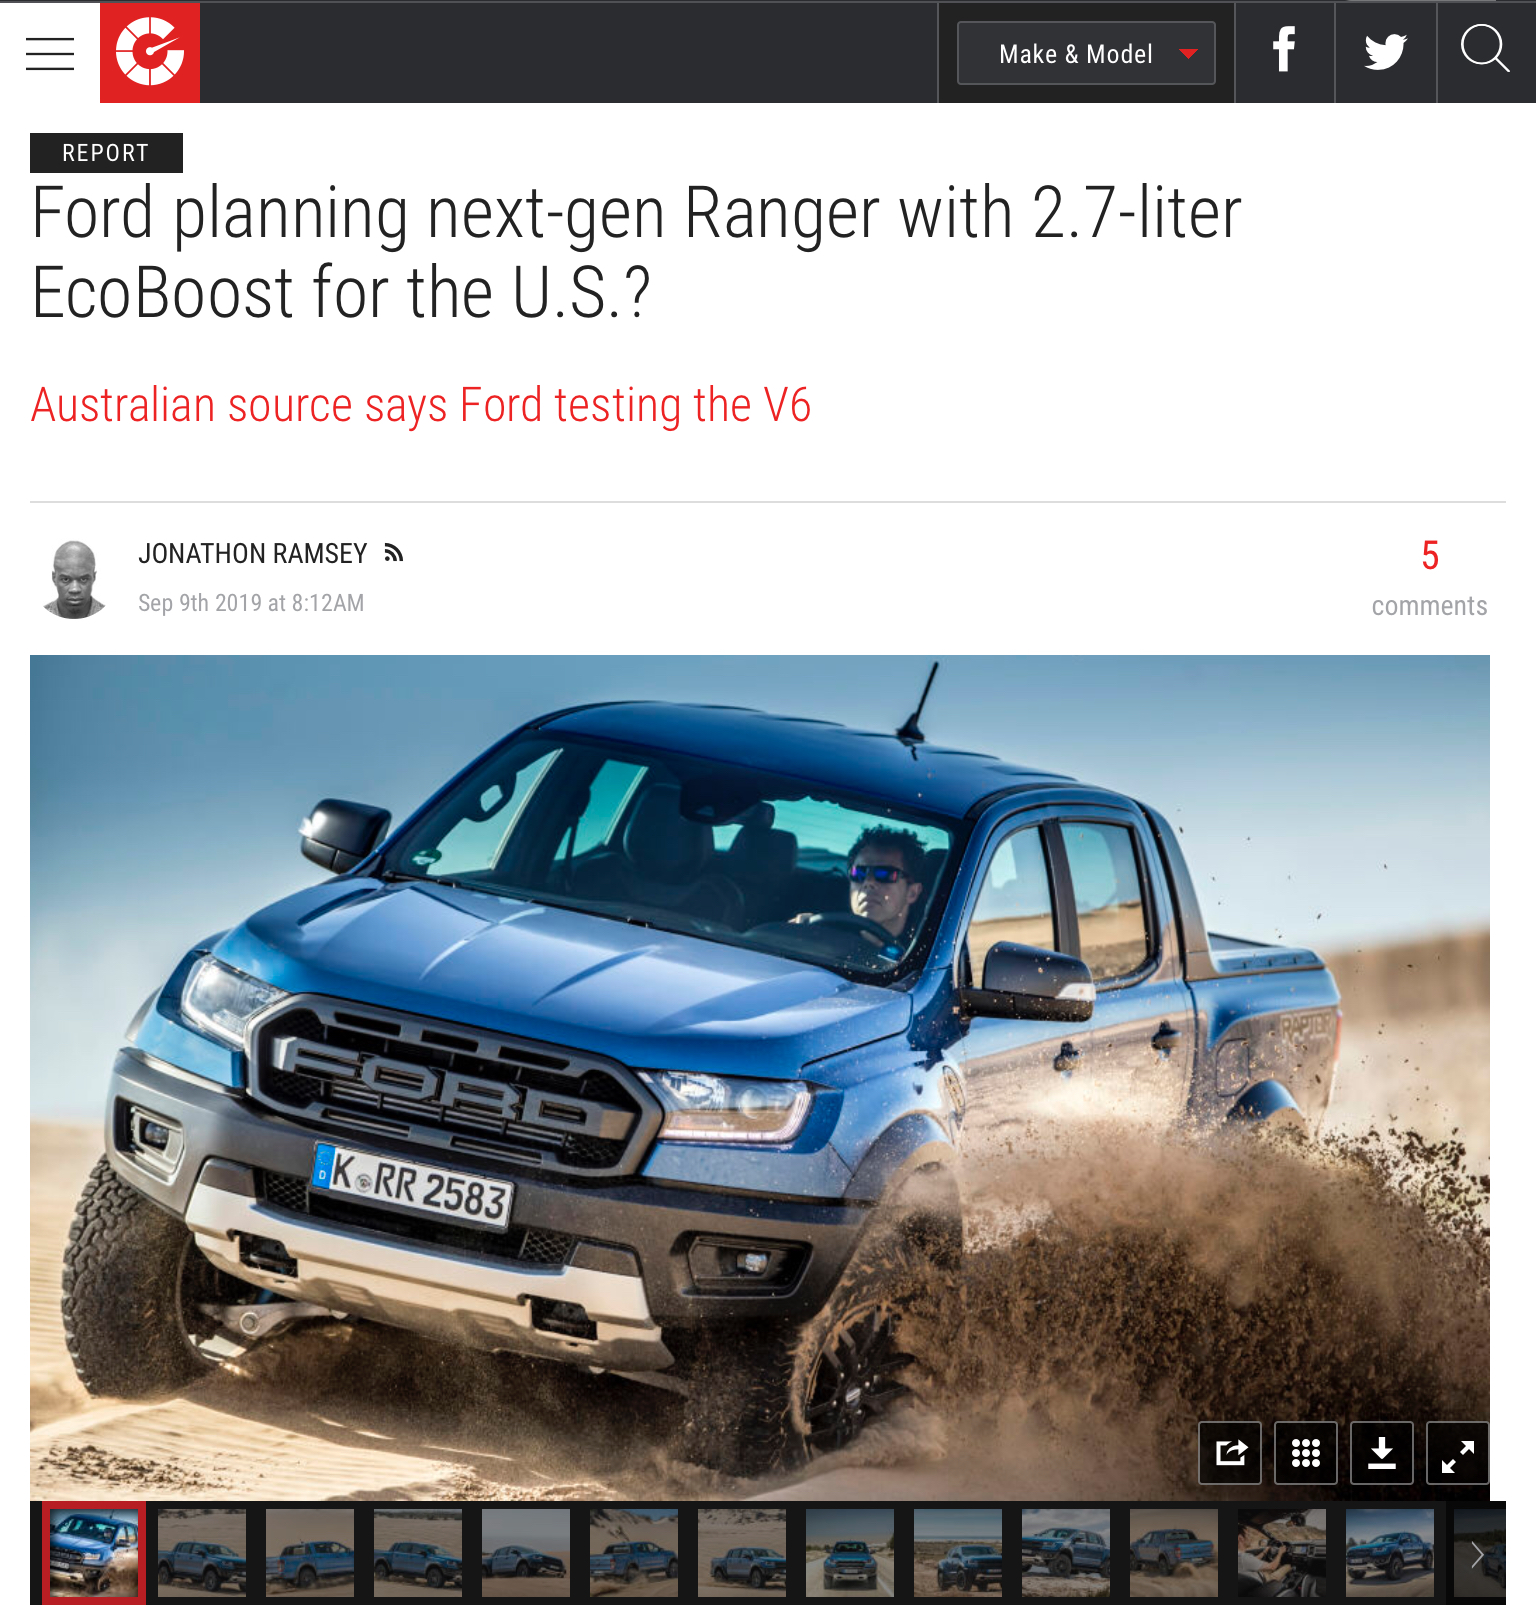 Ford Ranger Ford Authority: Next-Gen Ranger Rumored To Get Twin-Turbo V6 Engine upload_2019-9-9_16-31-15